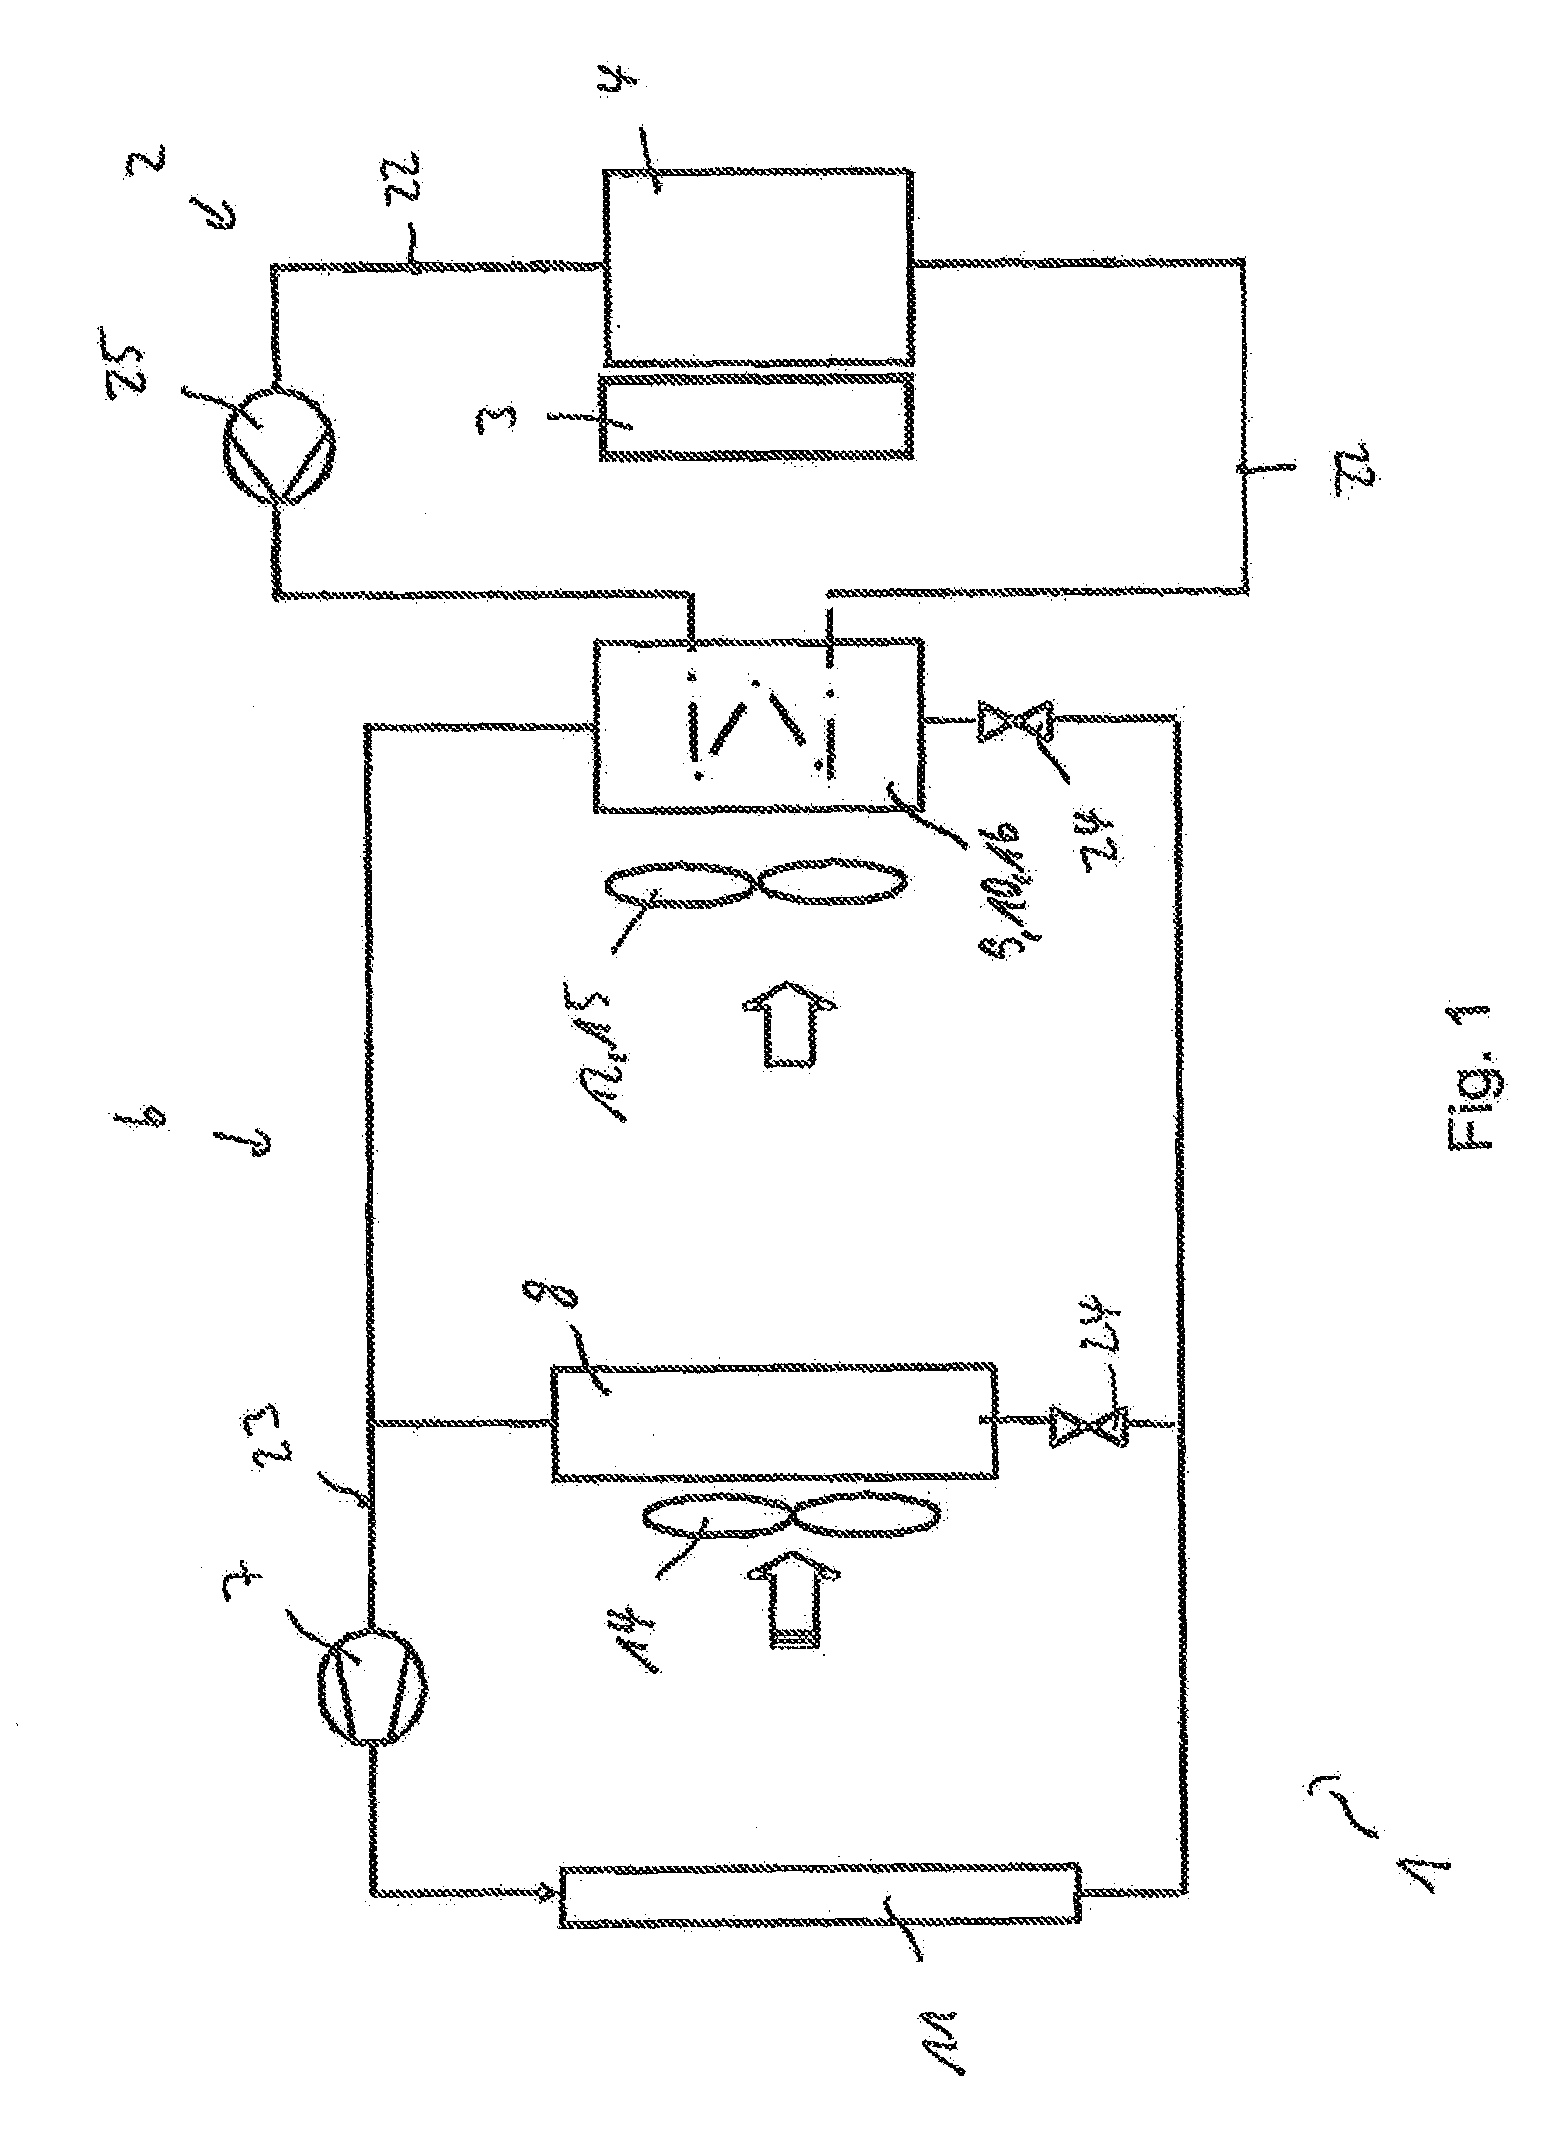 System for a motor vehicle for heating and/or cooling a battery and a vehicle interior